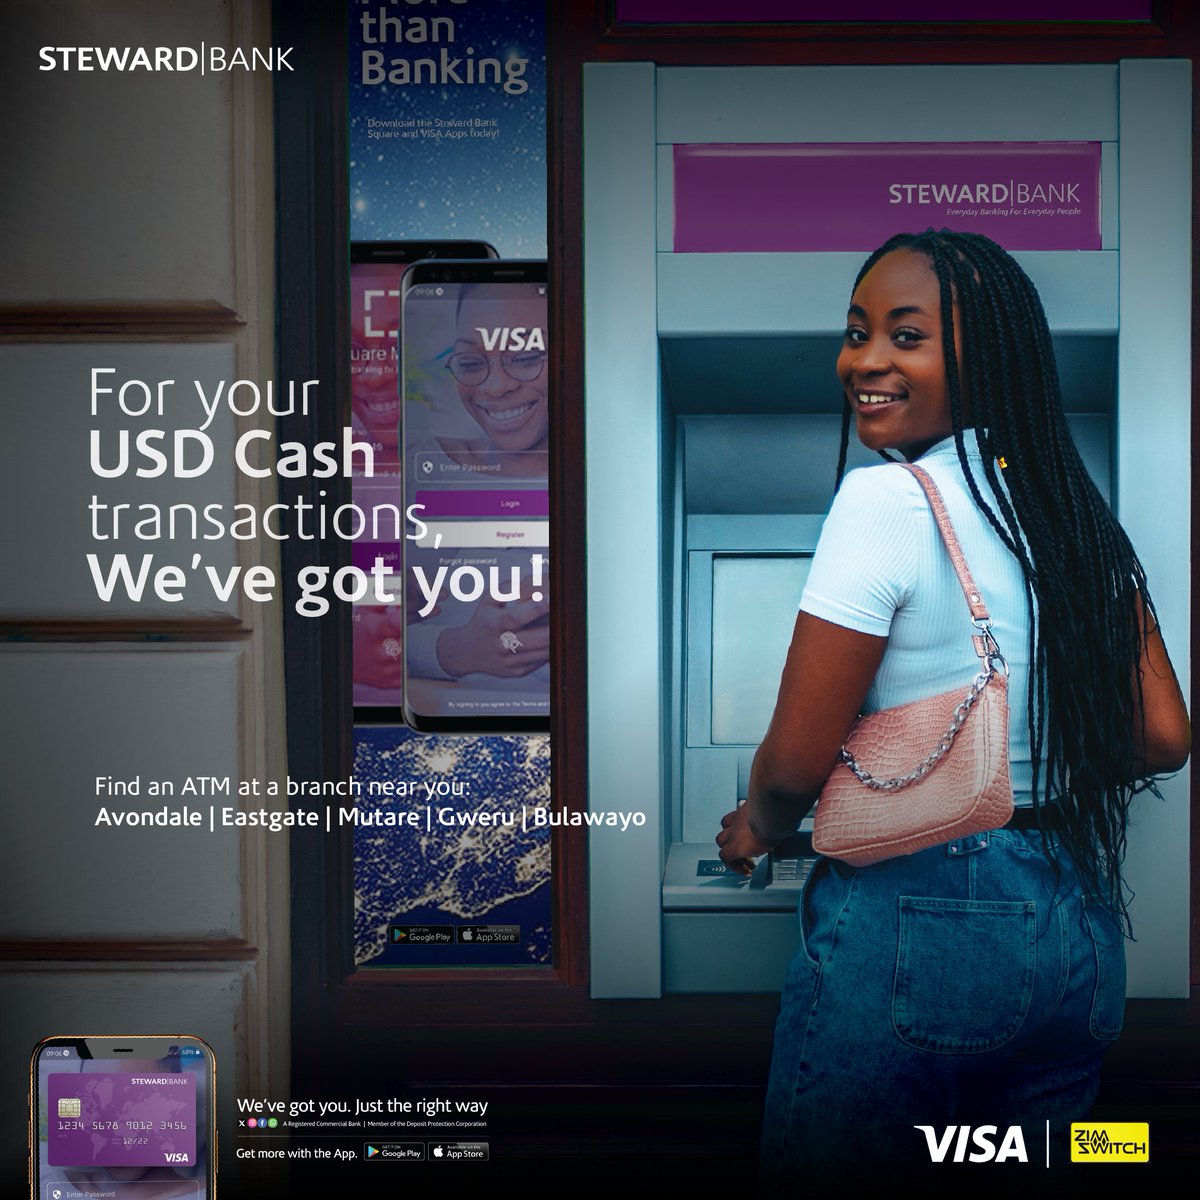 🙂 You can now withdraw funds using your Visa Globetrotter card on the Steward Bank smart ATM!

🟪Locations: Avondale branch, Bulawayo branch, Eastgate branch, Gweru branch and Mutare branch.

✅Withdraw USD cash, check balance, change PIN and more.

#WeveGotYou